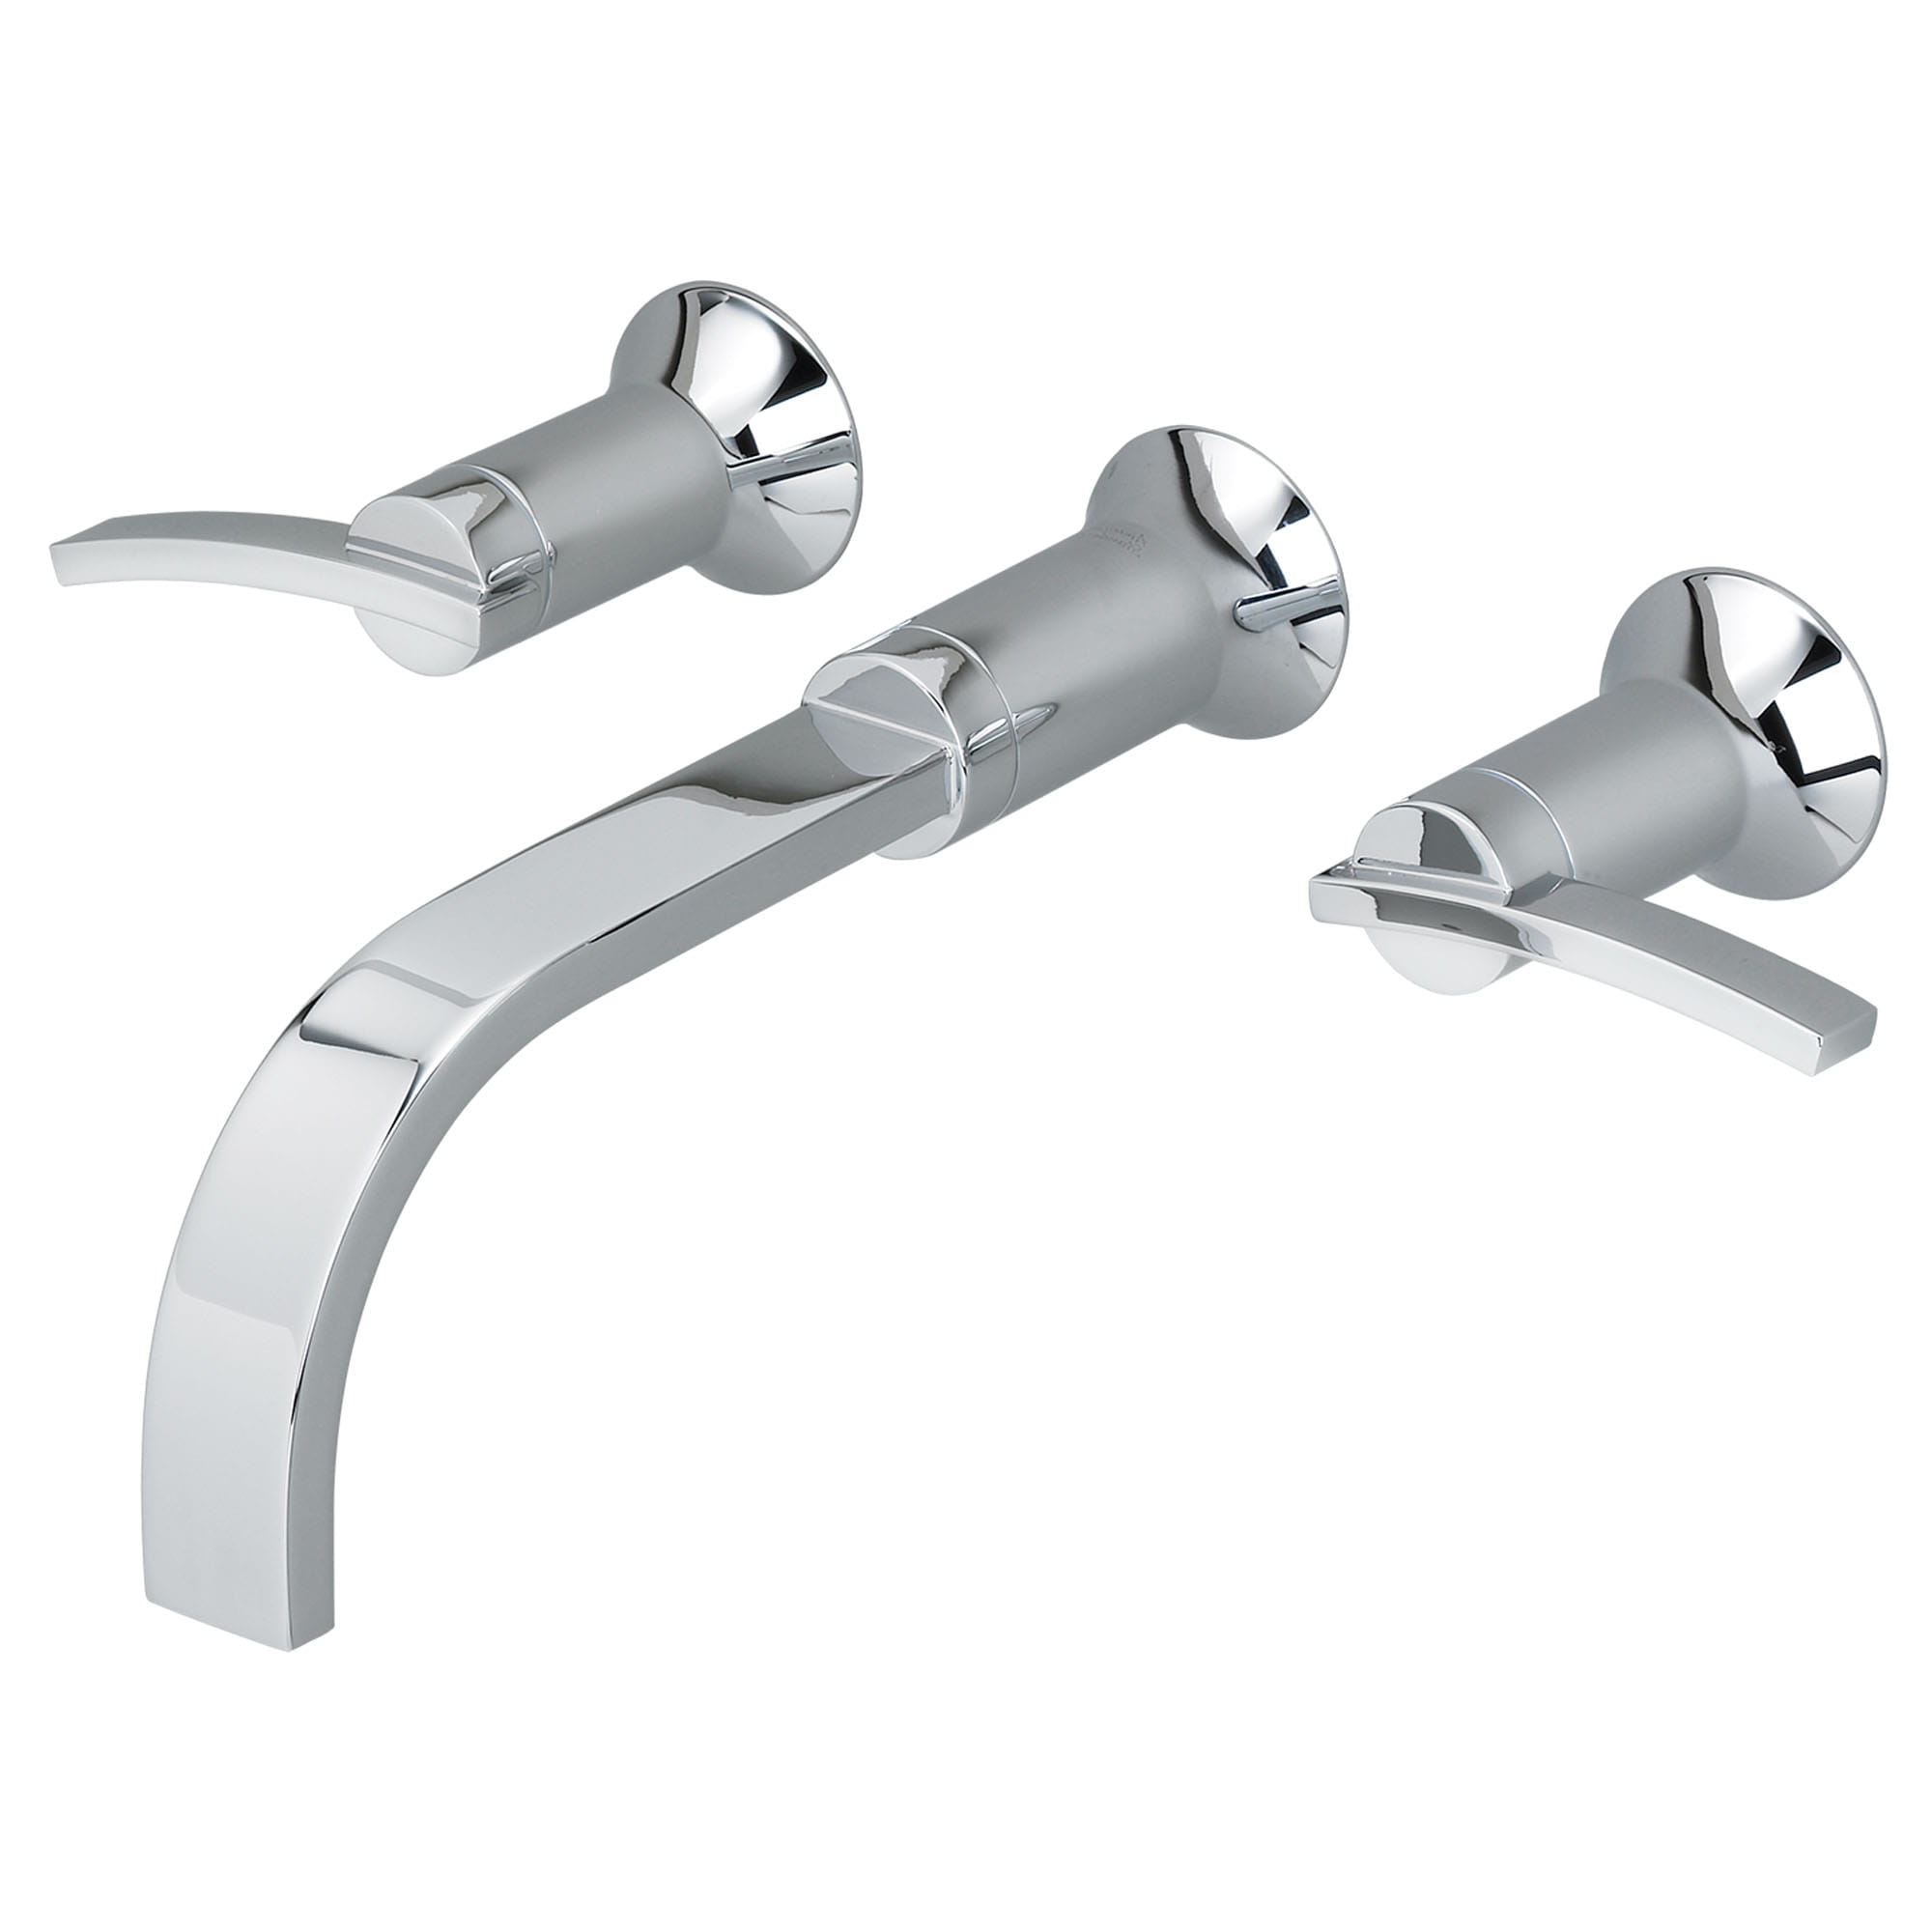 Berwick® 2-Handle Wall Mount Faucet 1.2 gpm/4.5 L/min With Lever Handles